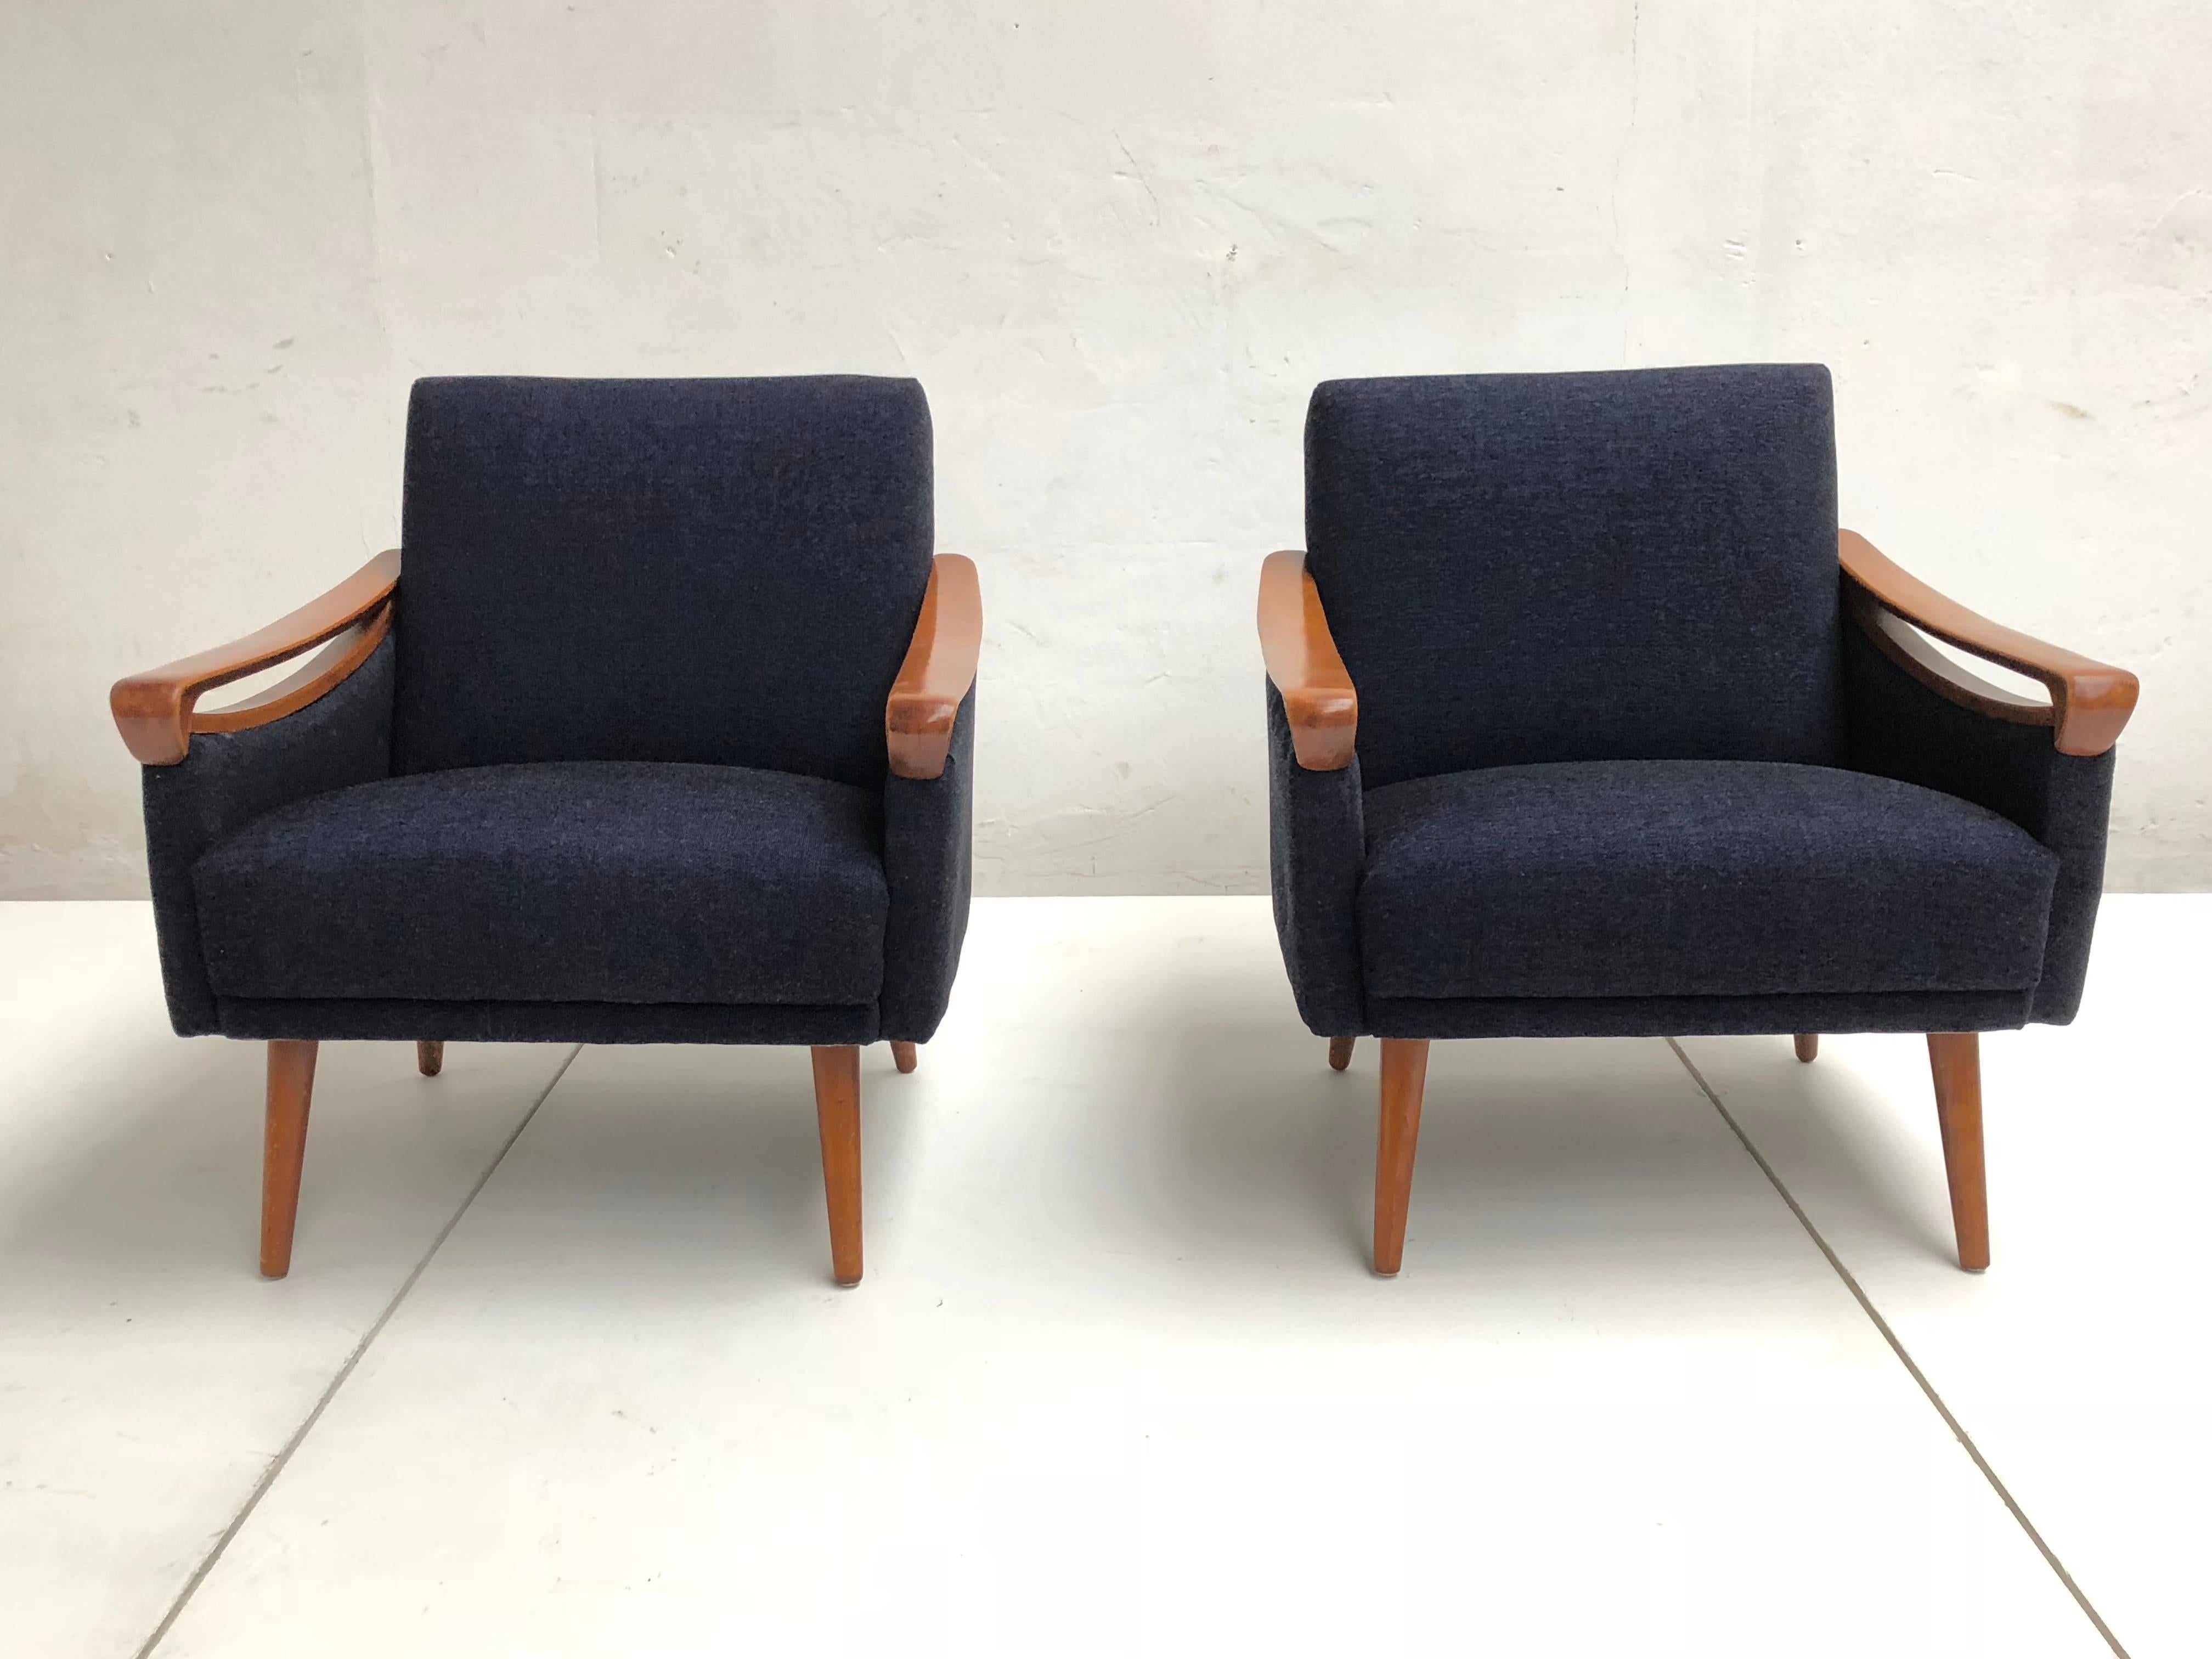 Mid-20th Century Pair of New Upholstered Mid-Century Modern Armchairs by Lifa, West Germany, 1963 For Sale